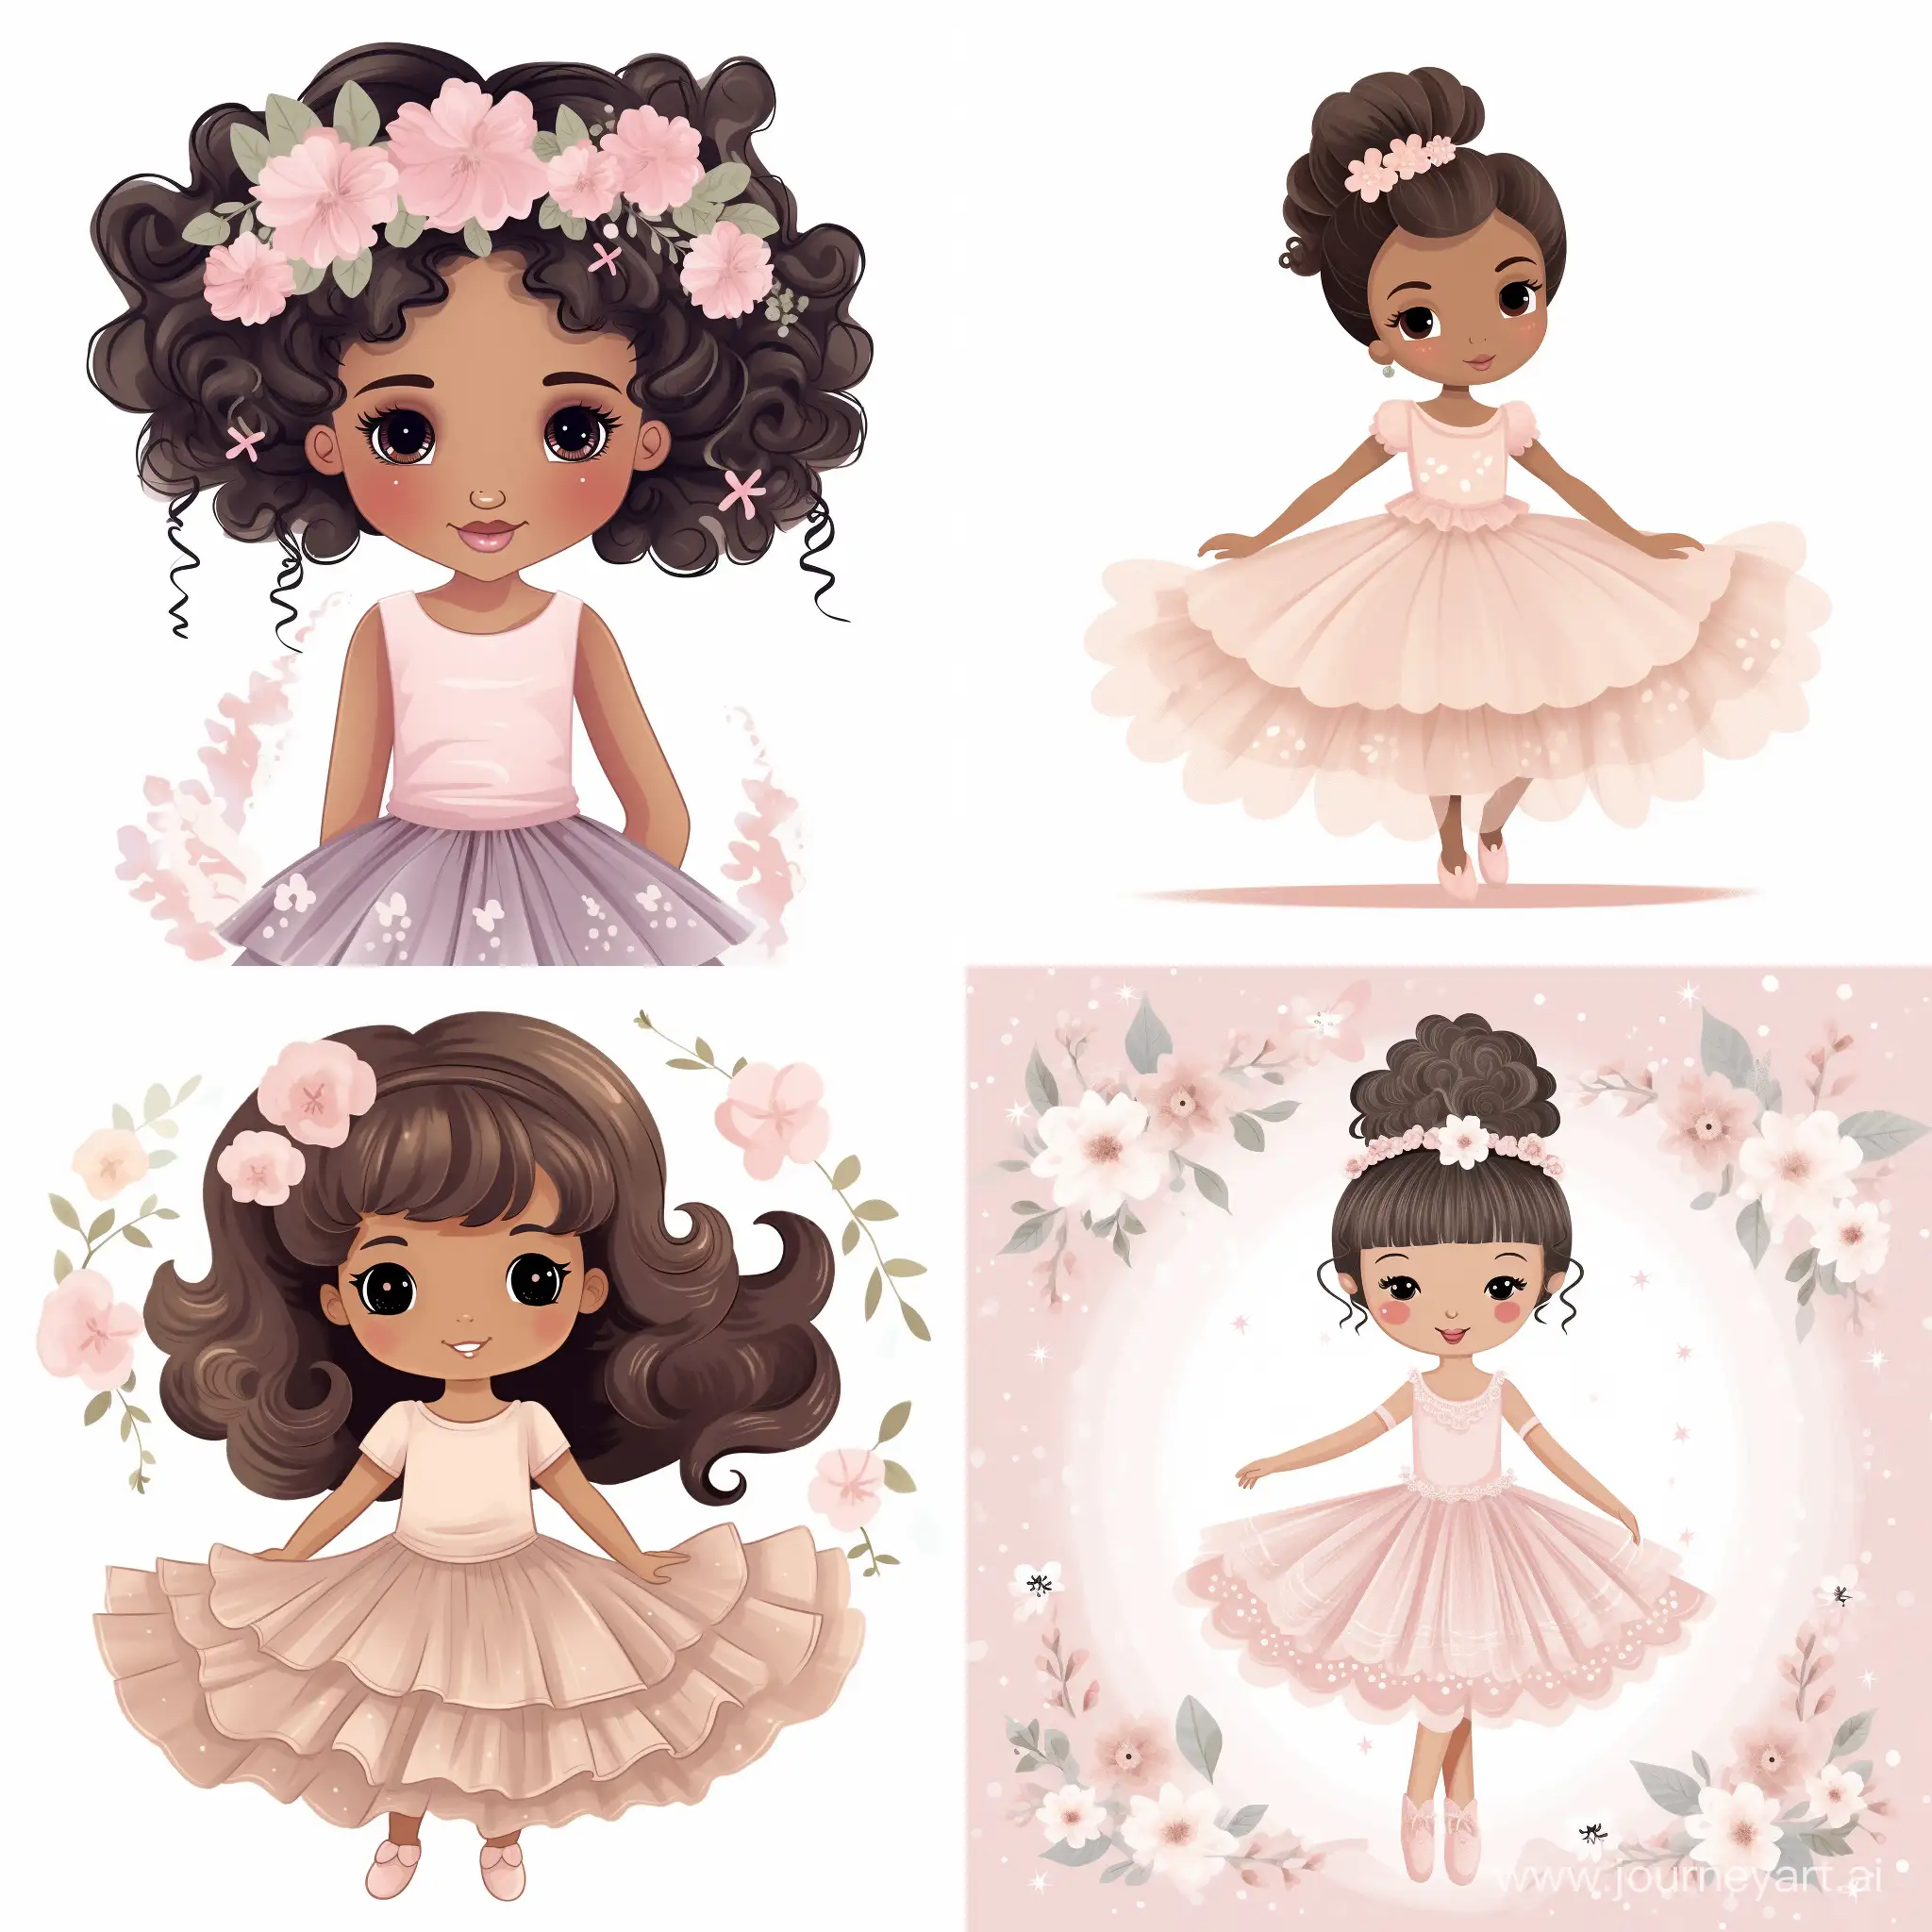 cute ballerina clipart limited color palette to 4 colors in the style of Children's tshirt design suitable for a 5 year old girl, painted illustration similar to artist Anna Bond from Rifle Paper Company